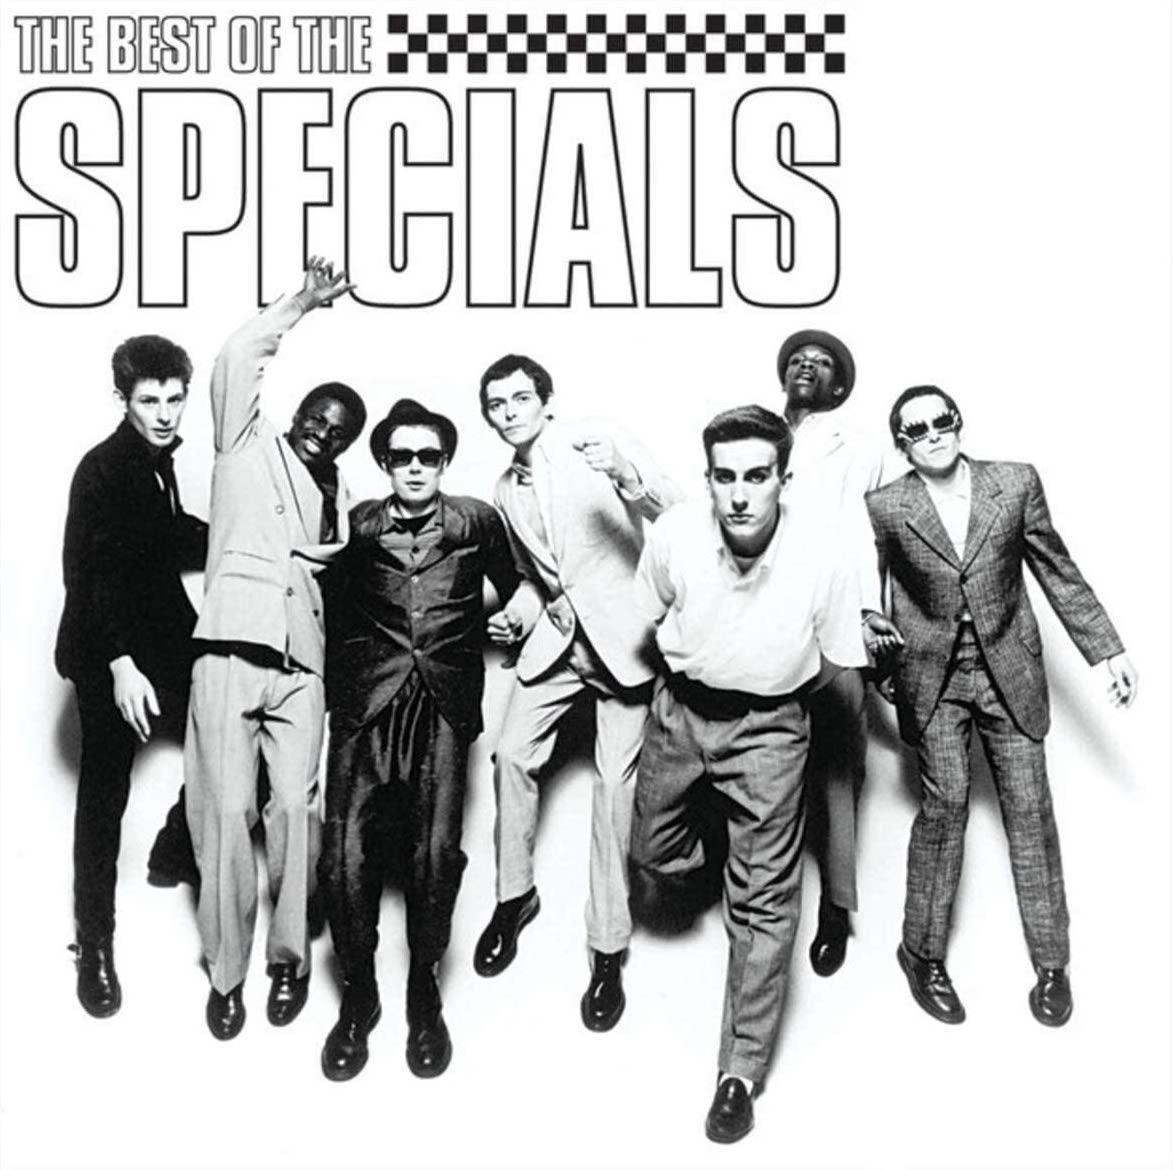 The Specials - The Best Of (2LP)